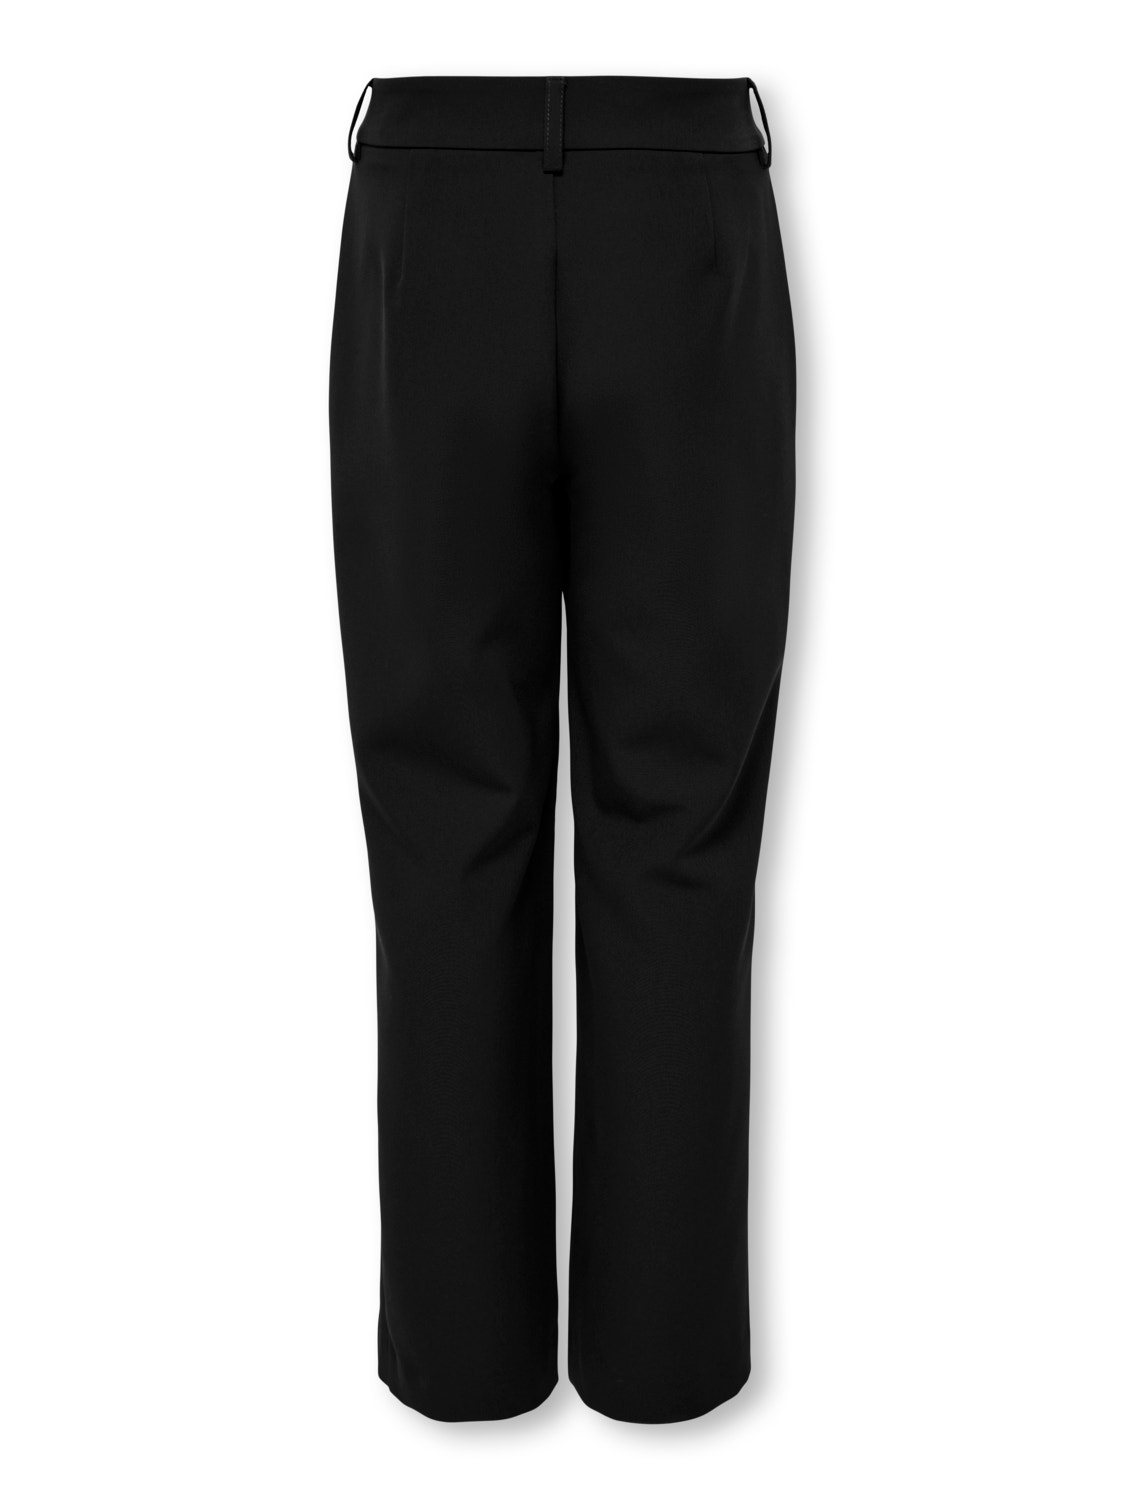 ONLY Trousers with mid waist -Black - 15300093